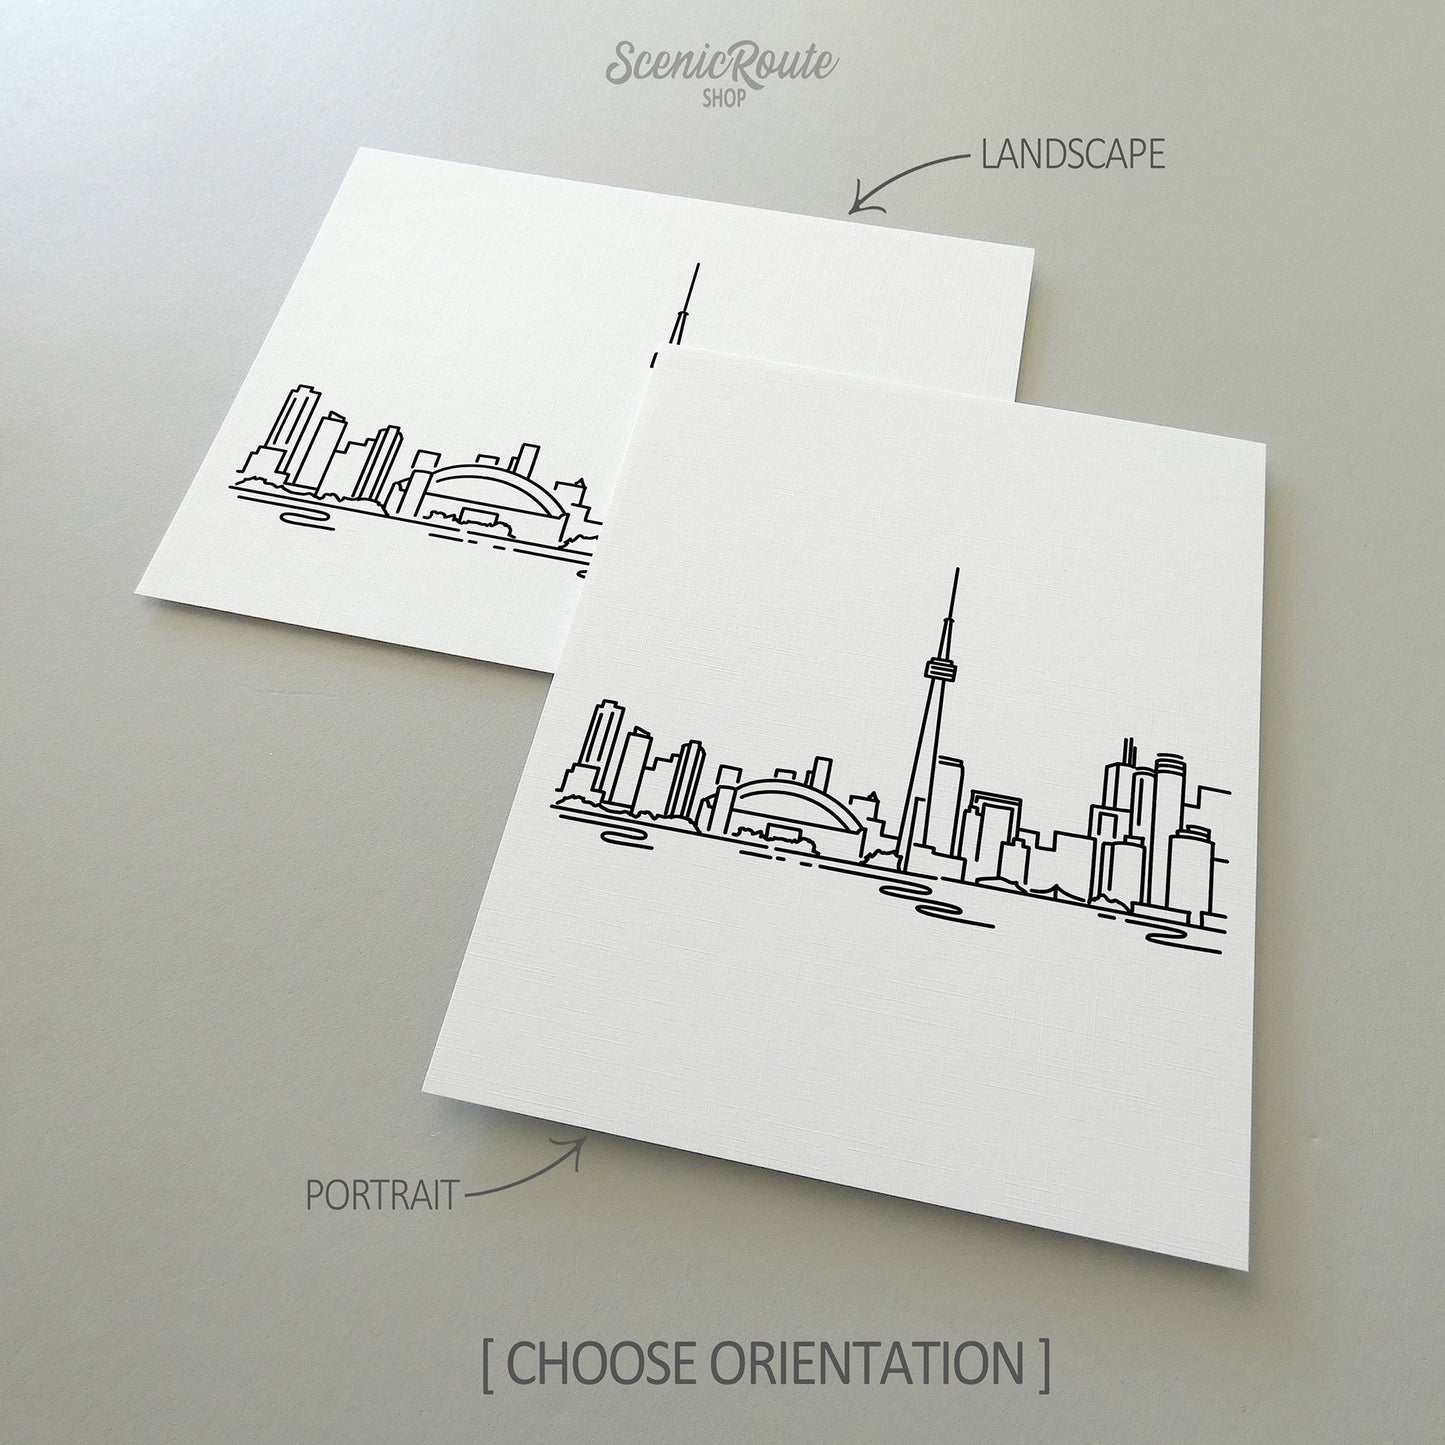 Two line art drawings of the Toronto Skyline on white linen paper with a gray background.  The pieces are shown in portrait and landscape orientation for the available art print options.